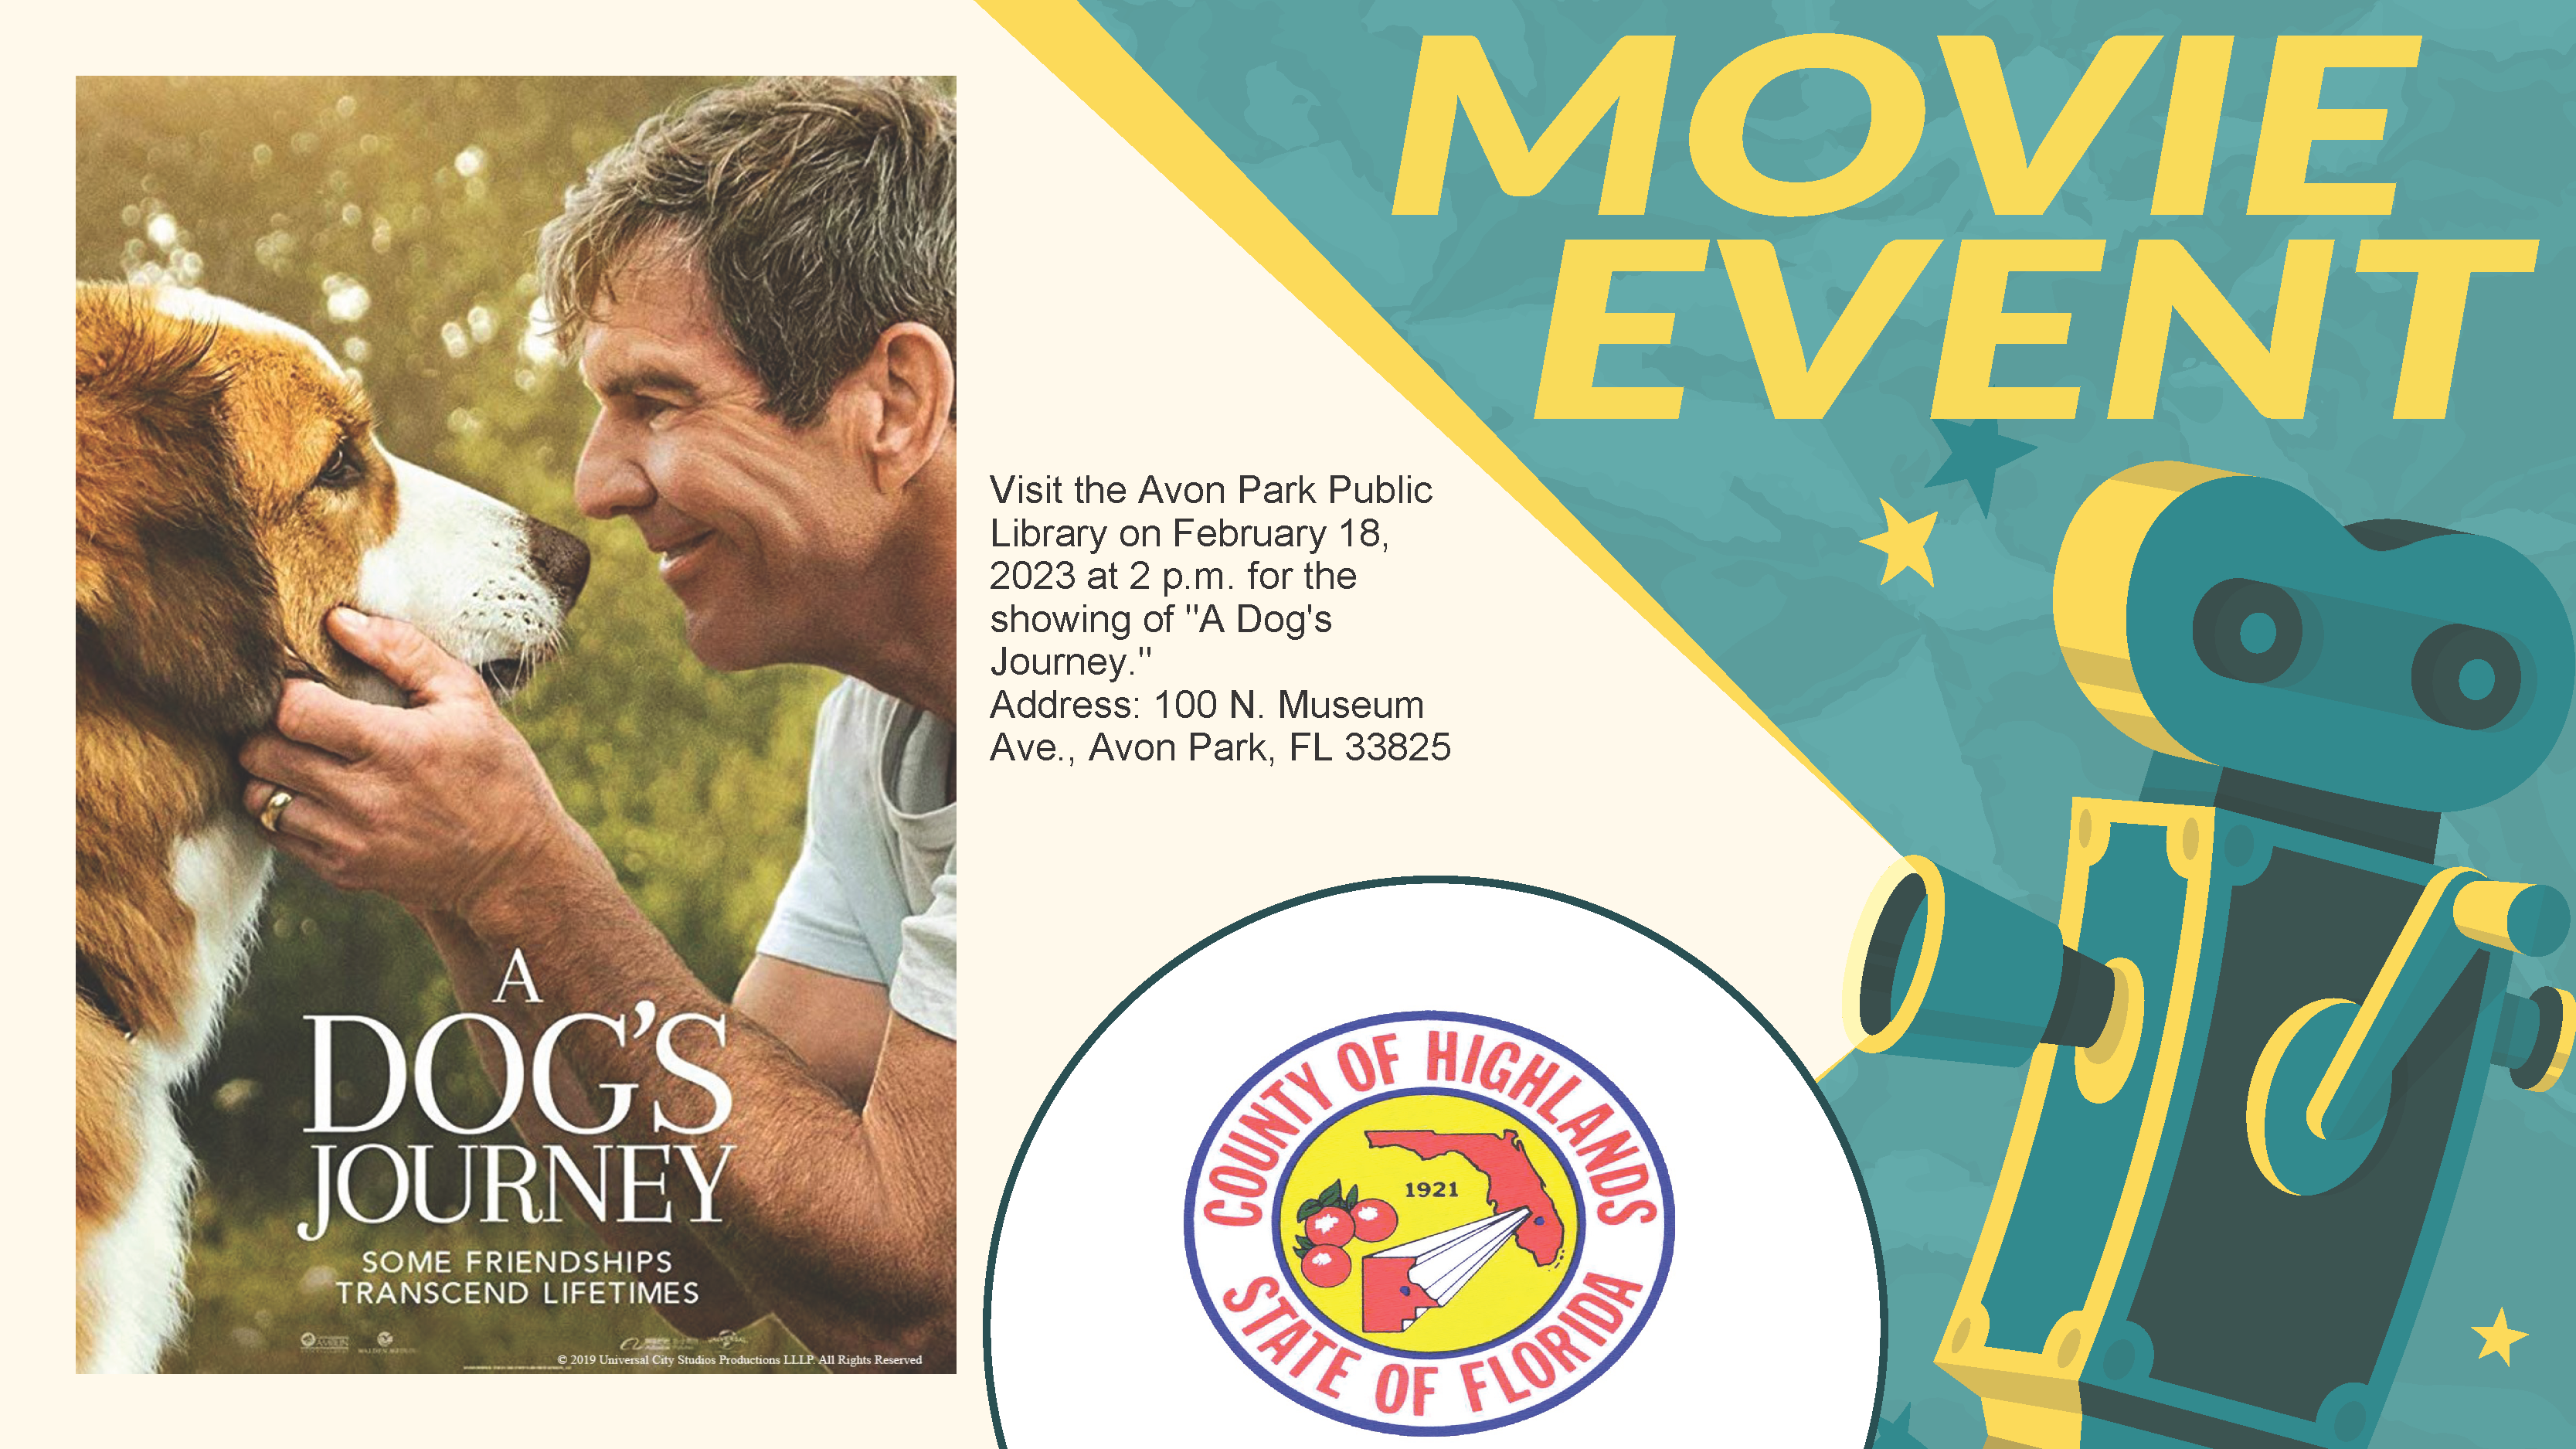 Visit the Avon Park Public Library on February 18, 2023 at 2 p.m. for the showing of "A Dog's Journey." Address: 100 N. Museum Ave., Avon Park, FL 33825